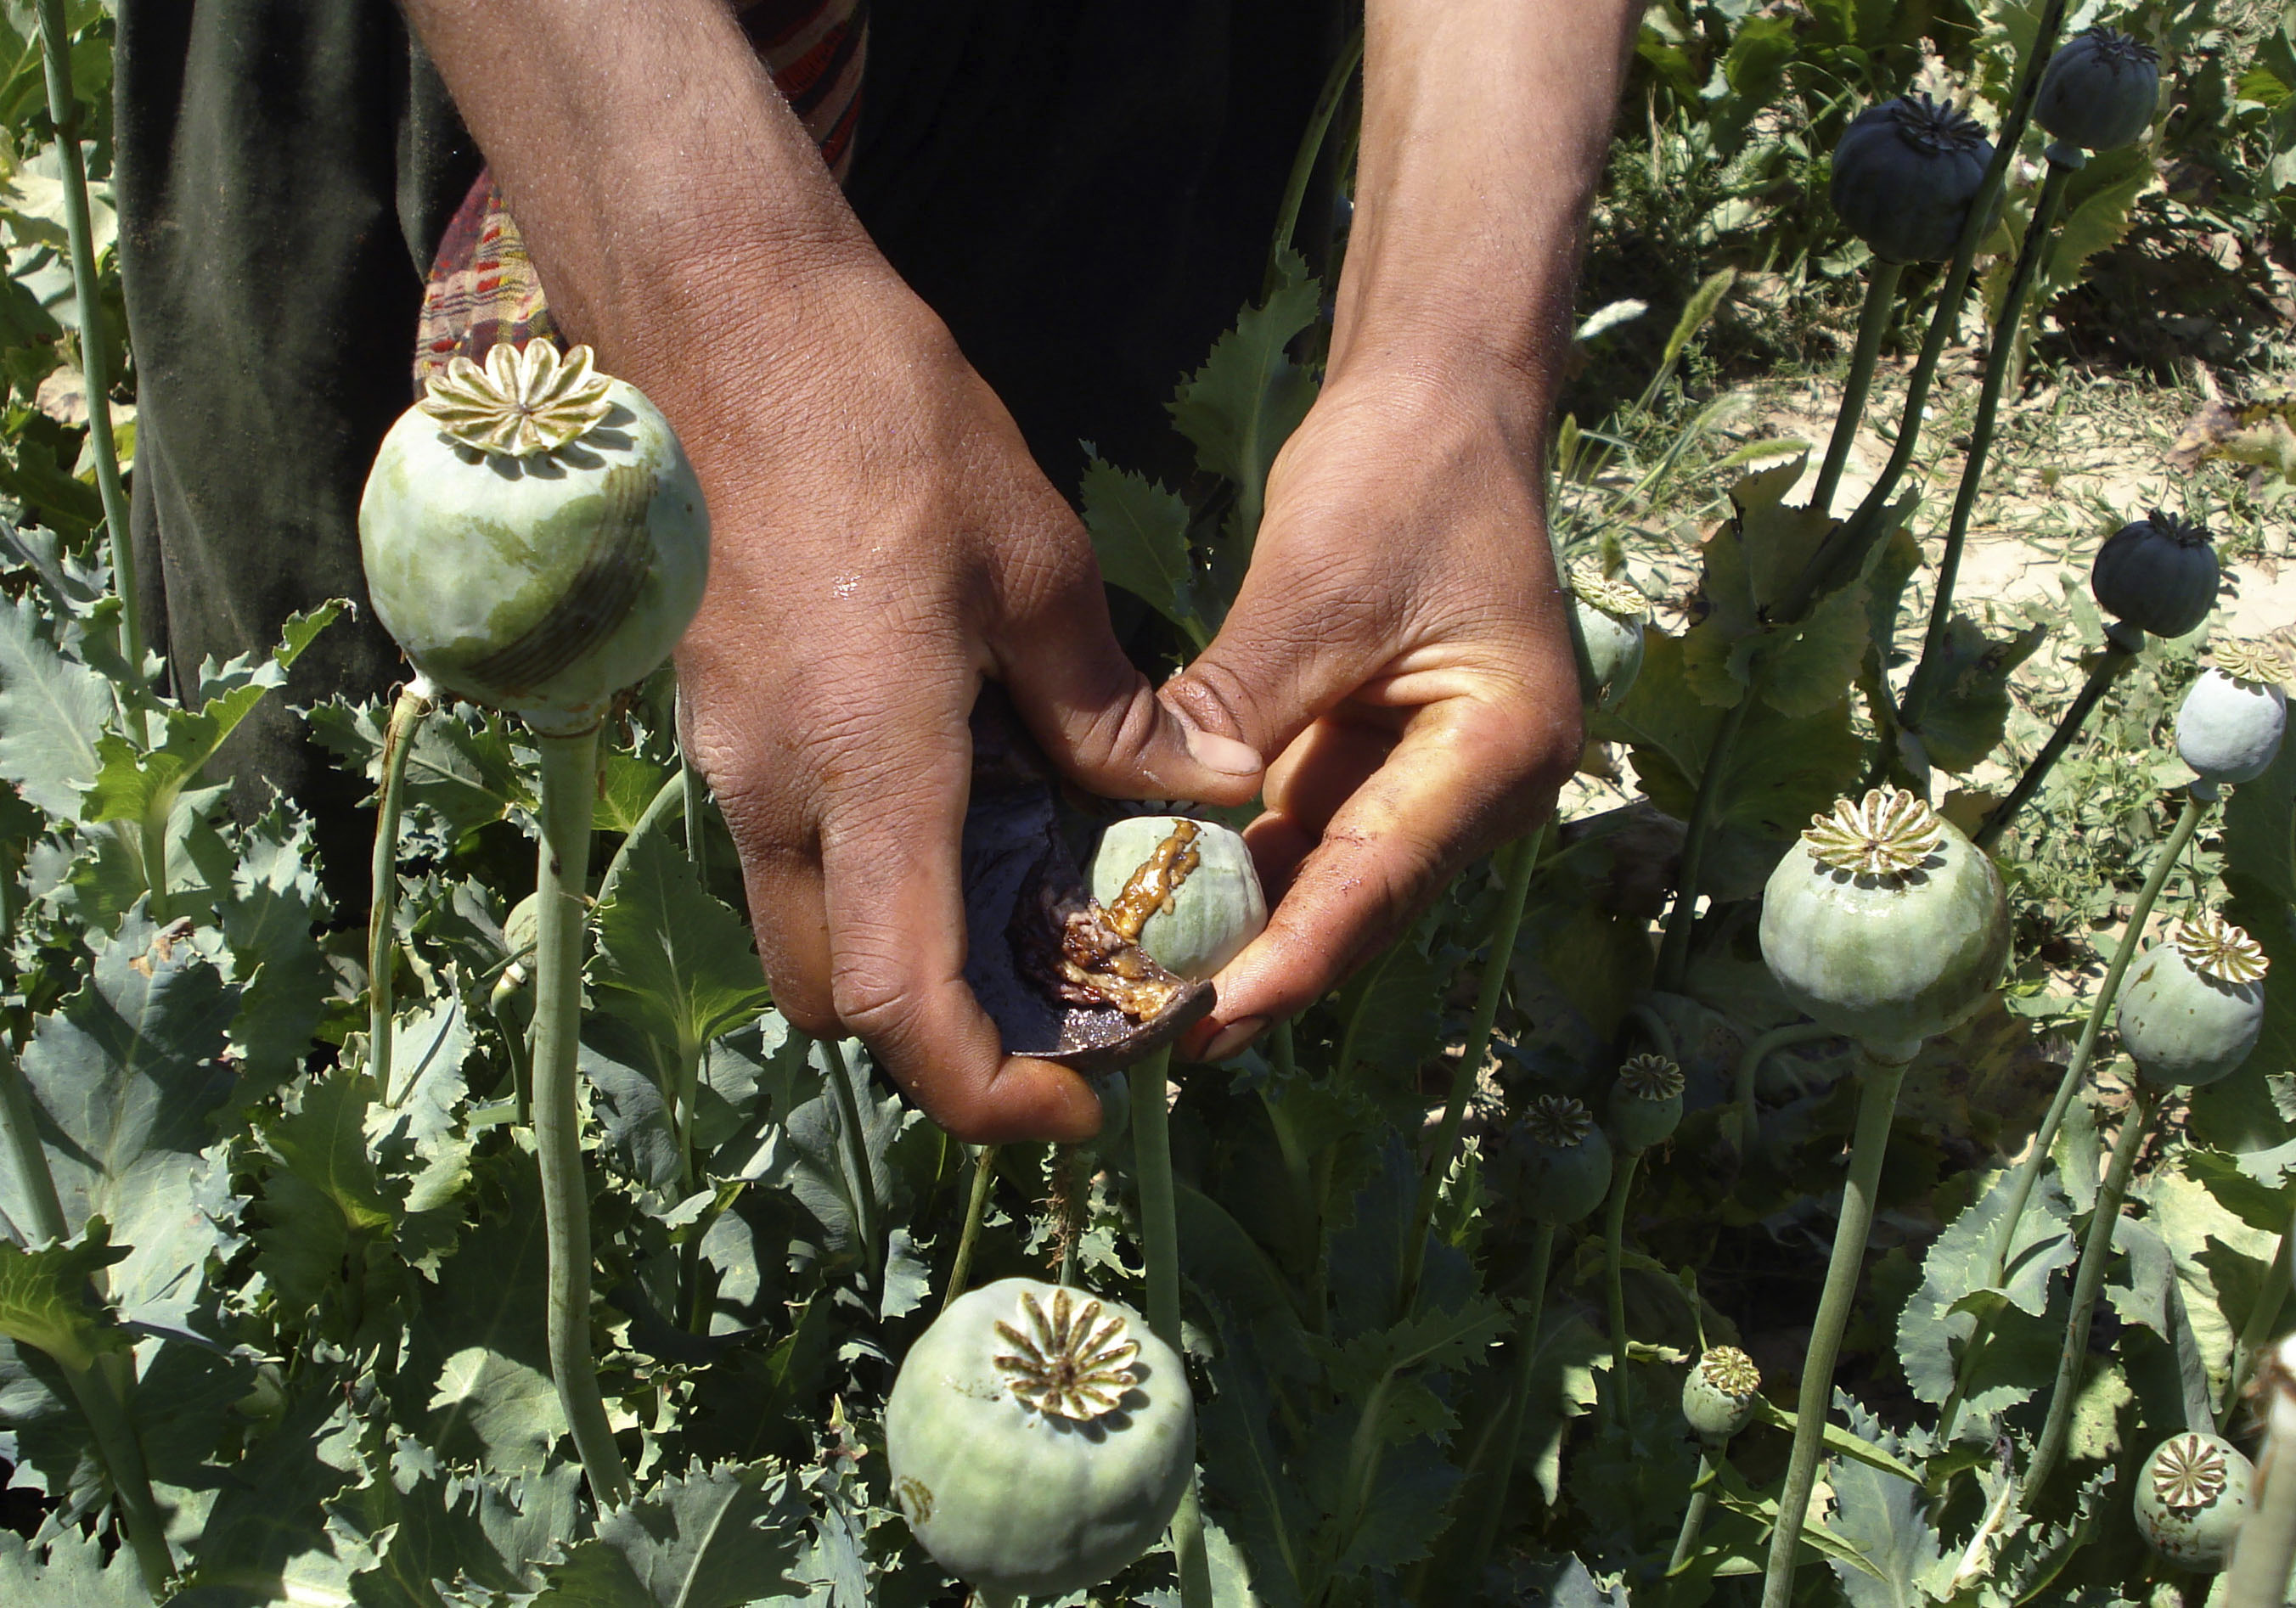 An Afghan man collects resin from poppies in an opium poppy field in Panjwai district of Kandahar province, south of Kabul, Afghanistan on Wednesday, May 21, 2008. Afghanistan supplies some 93 percent of the world's opium used to make heroin (AP Photo)